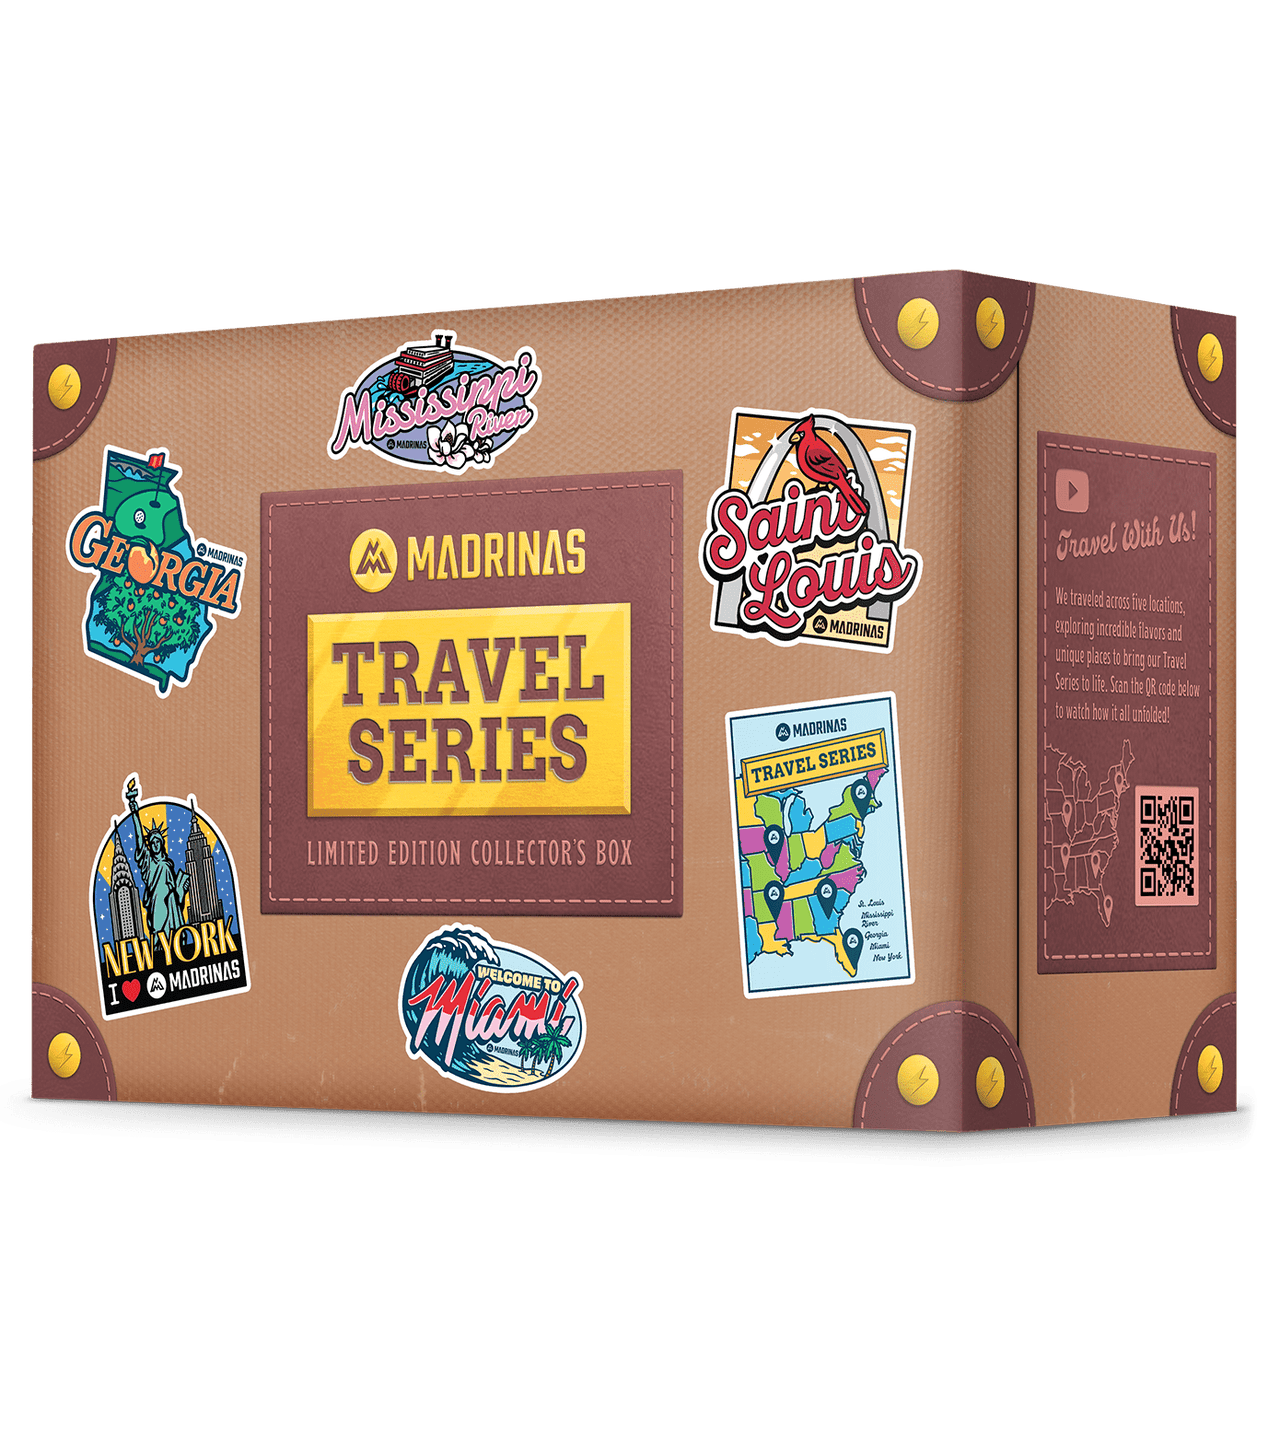 Travel Series Limited Edition